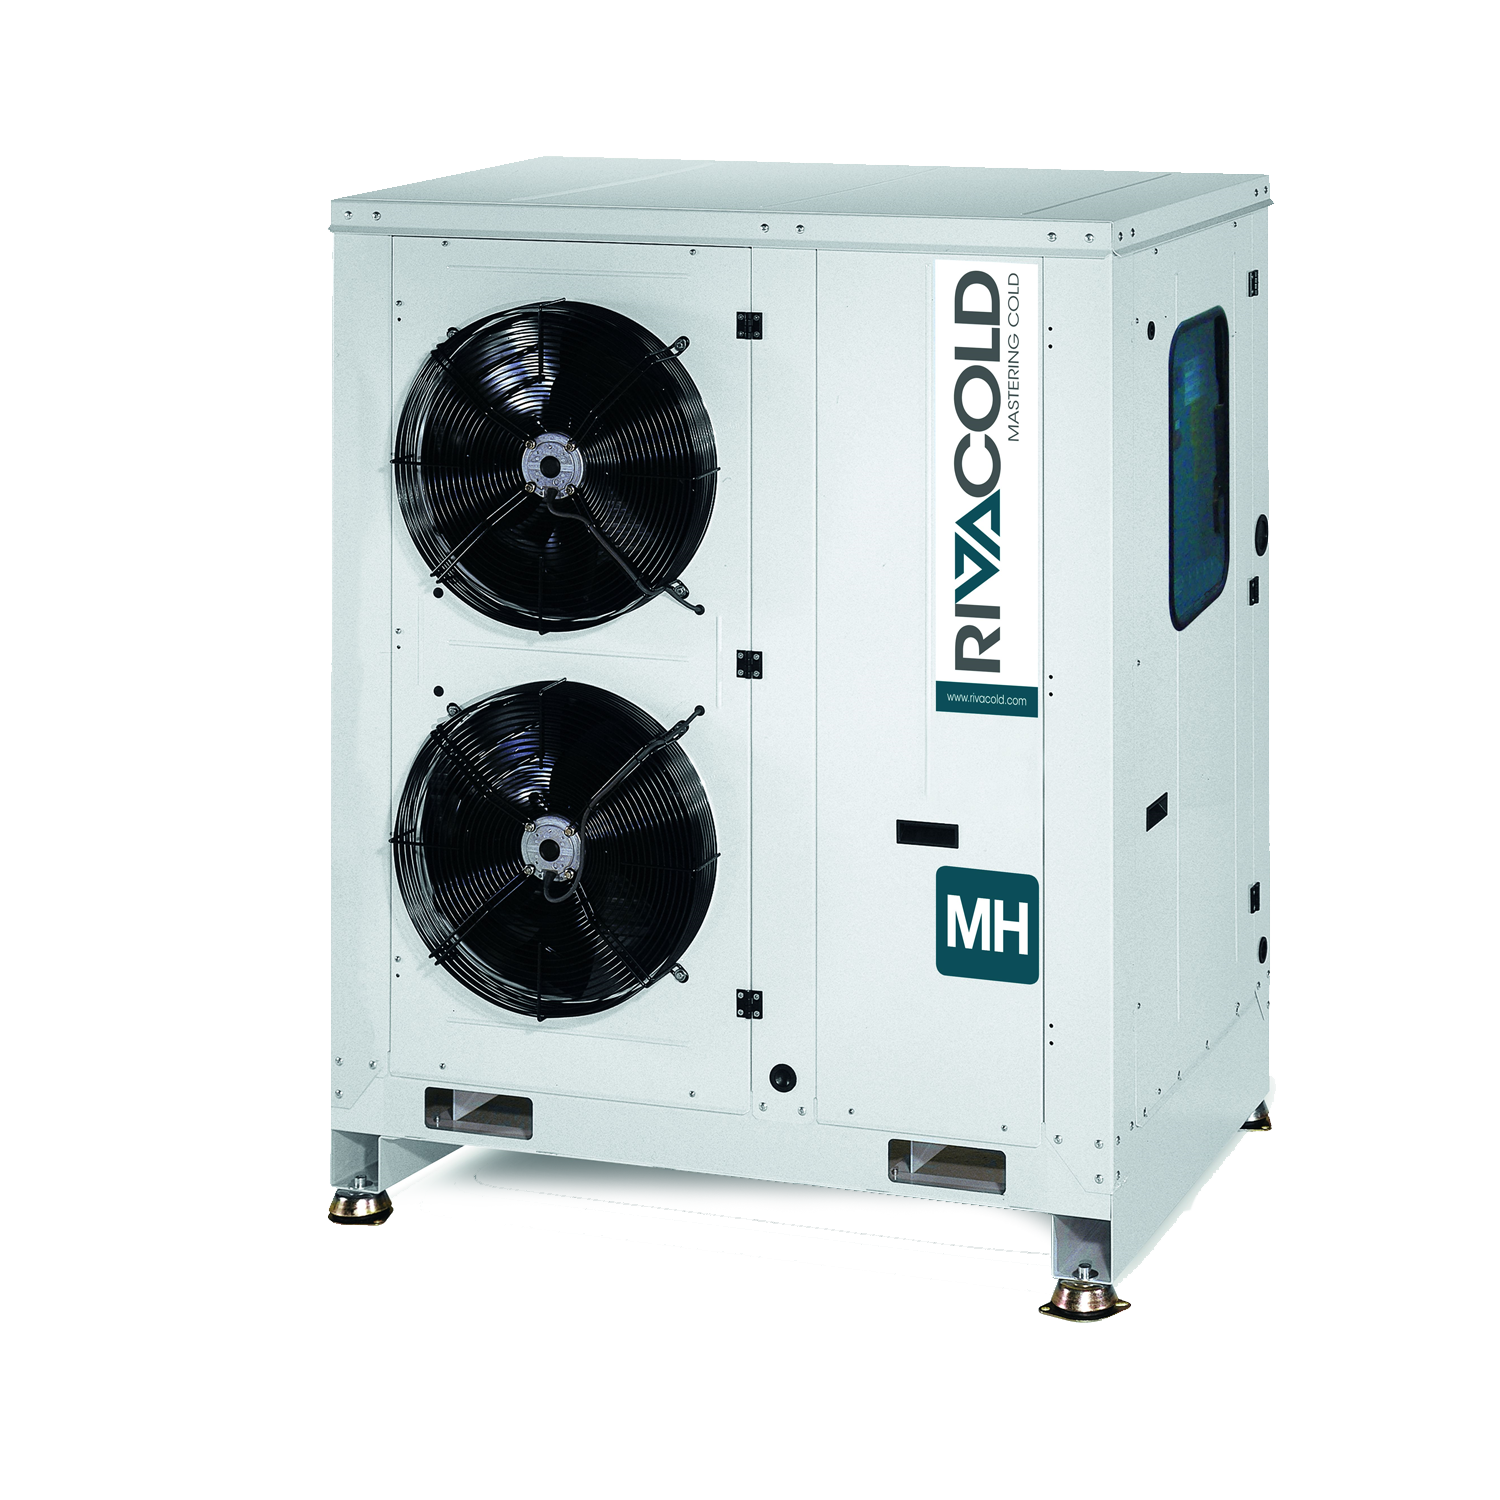 MH-U: Air-cooled condensing units with hermetic reciprocating compressors – R134a/R449A/R452A